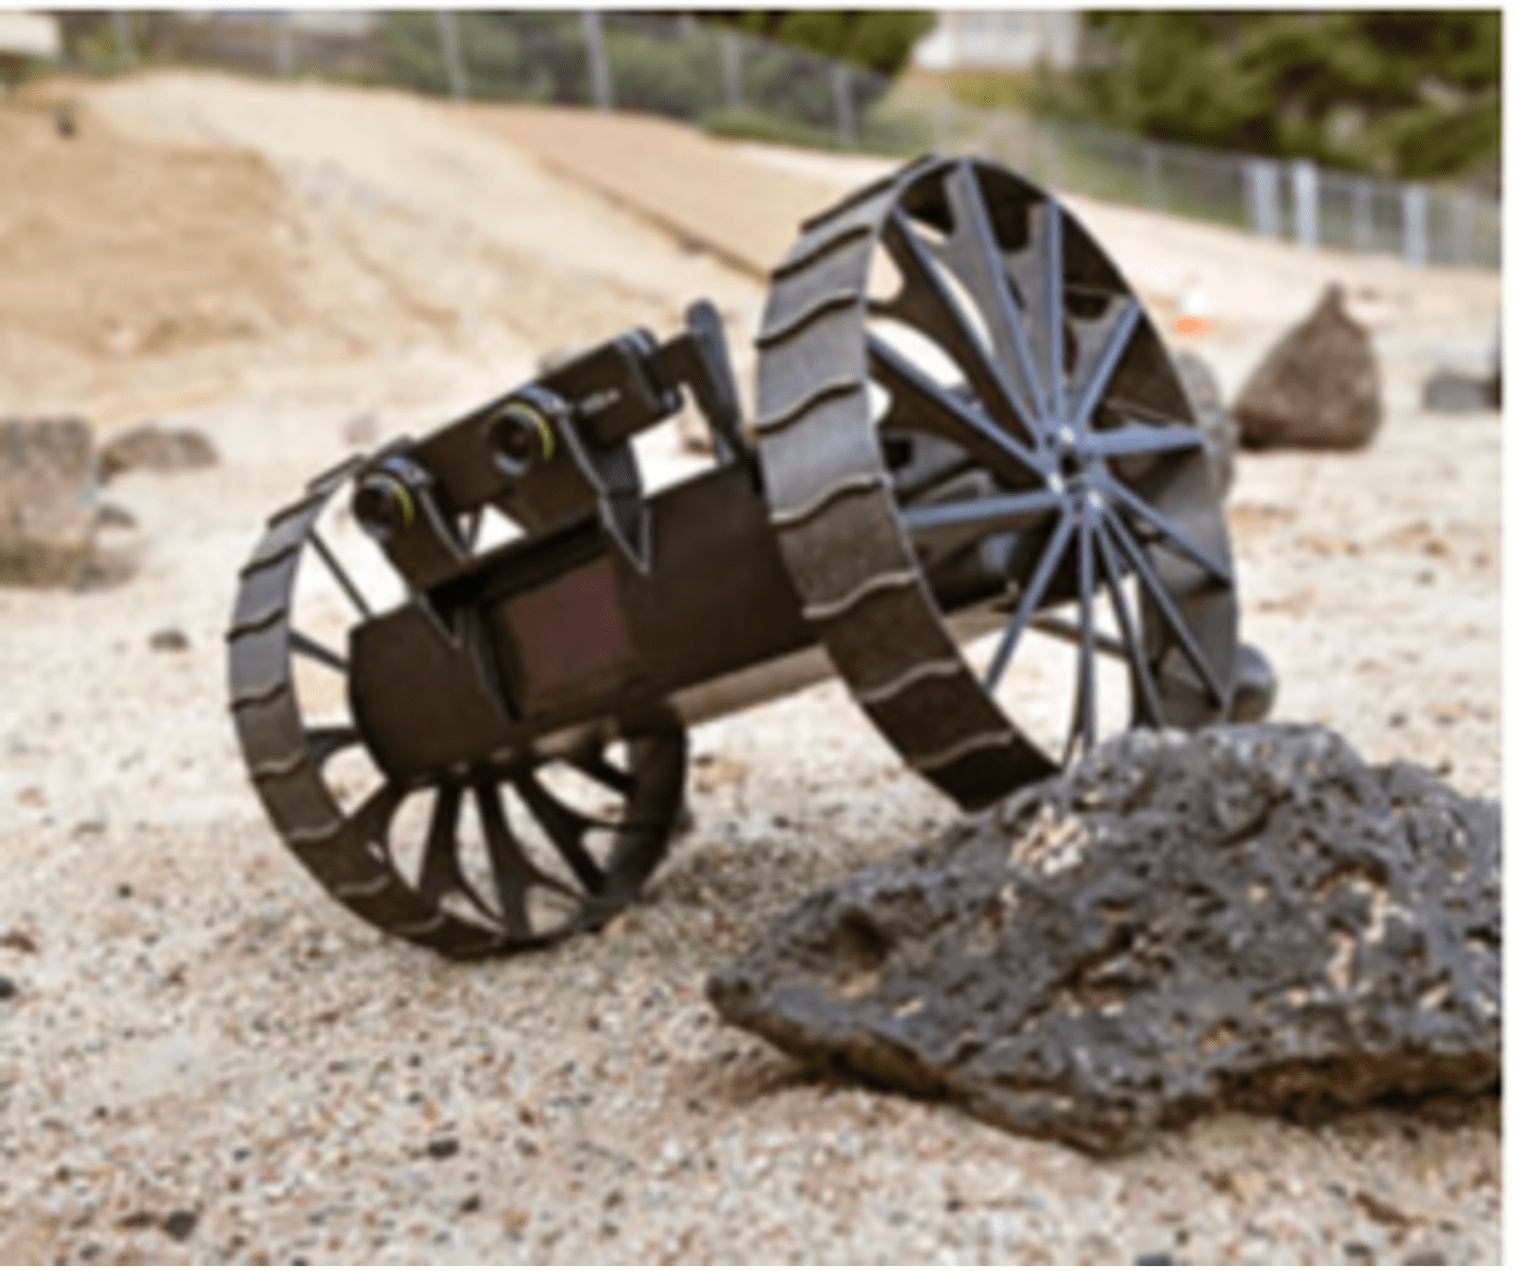 A small, motorized robot rolls on the surface of a sandy area. The robot has two large wheels and the one on the right is driving over a large black wheel. The overall color of the rover is a dark black while the sand contrasts as a tan color.